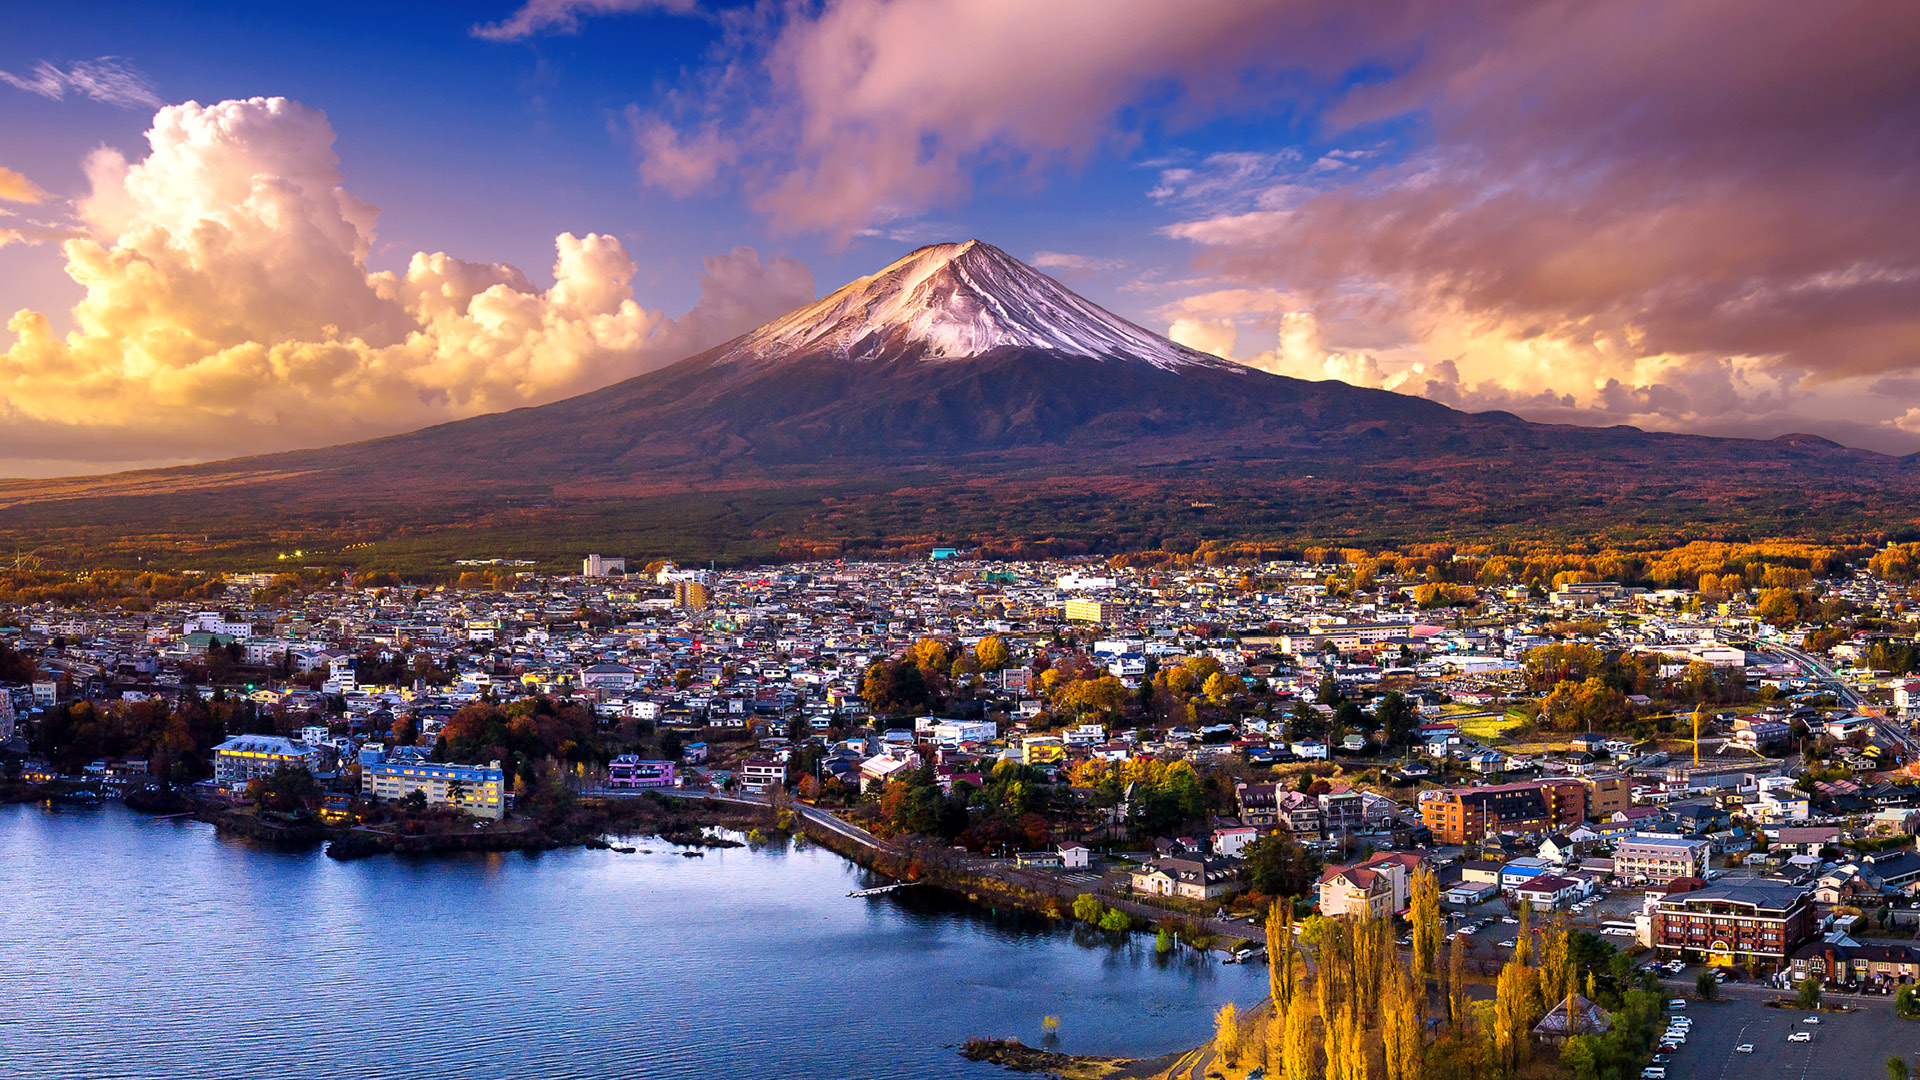 Mt Fuji In Japan To Remain Closed For Travellers This Summer